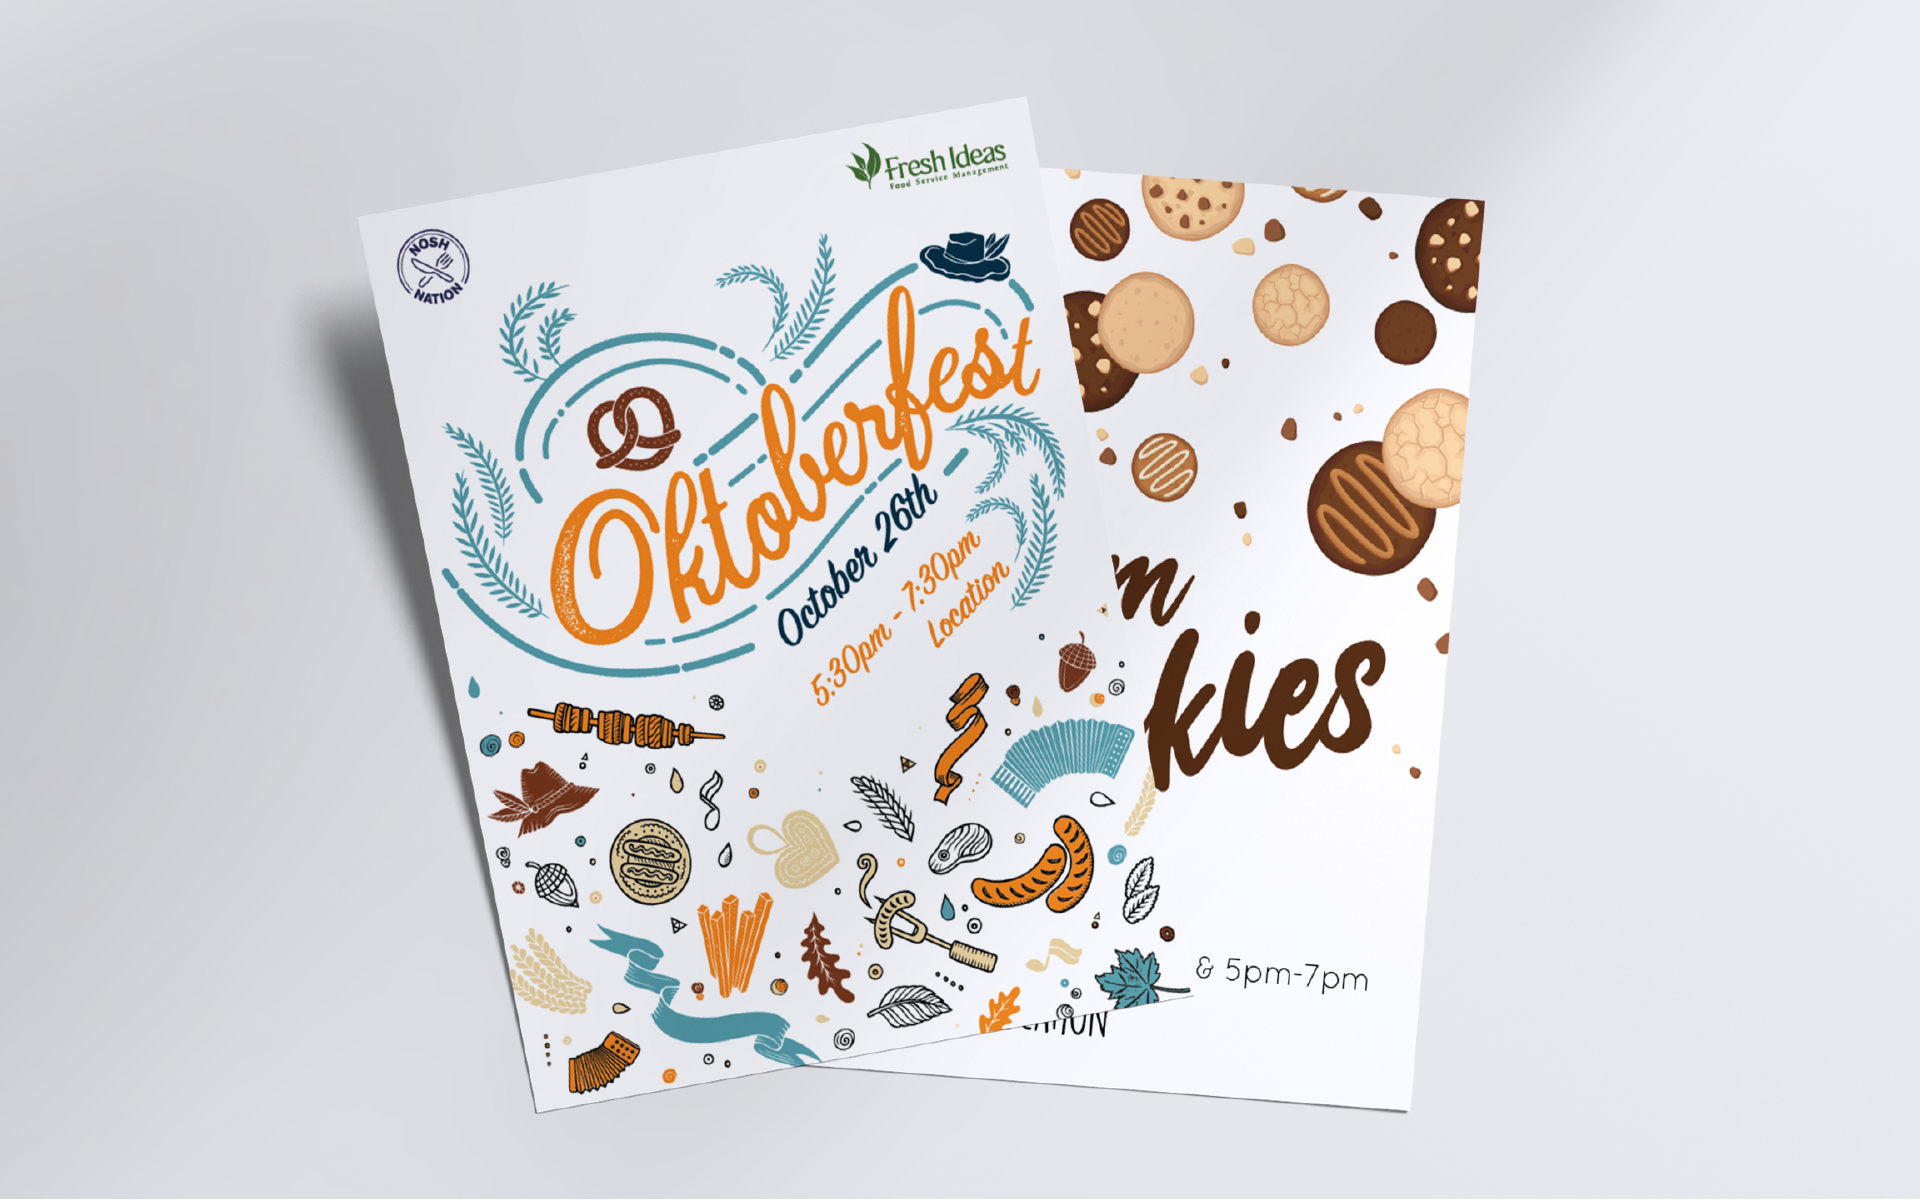 Two flyers on a blank background. The top one advertising an Oktoberfest event. And the bottom one advertising a warm cookies event.